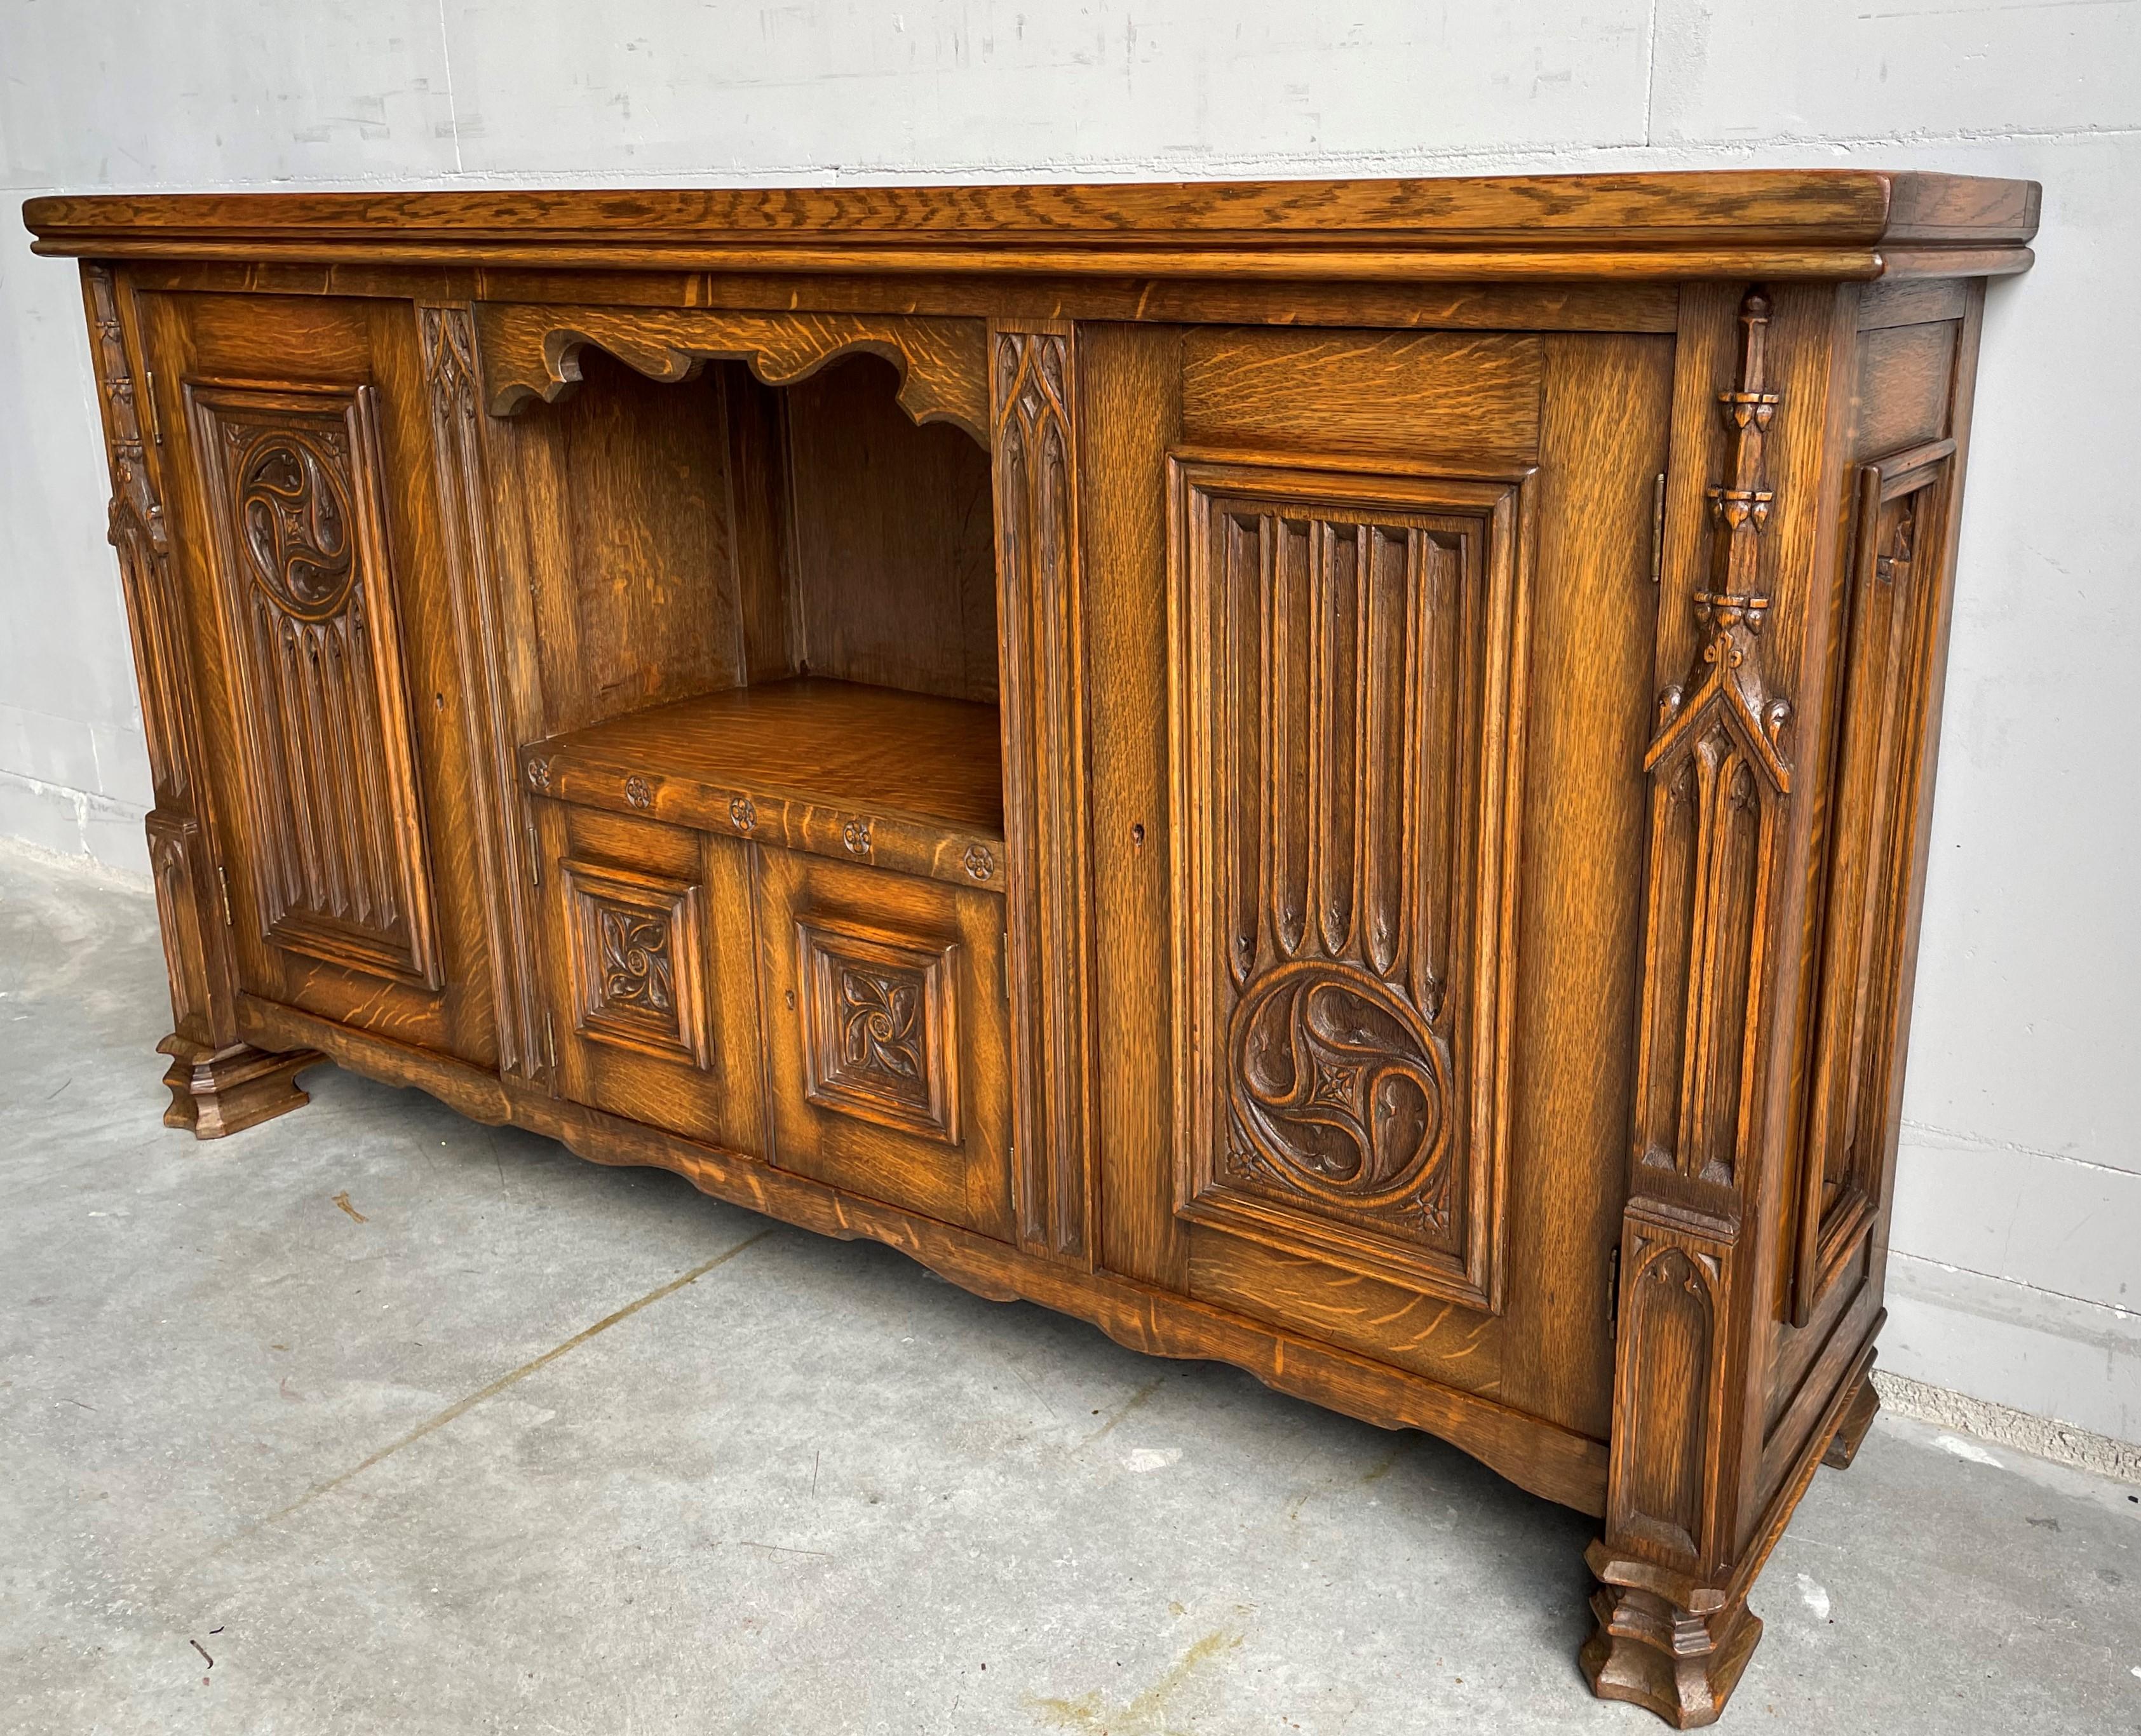 Beautiful and practical size, hand carved Gothic cabinet.

This antique Gothic Revival cabinet can be placed tight on your wall and thanks to its wide and undeep design this medieval style beauty can be placed almost anywhere whilst hardly taking up